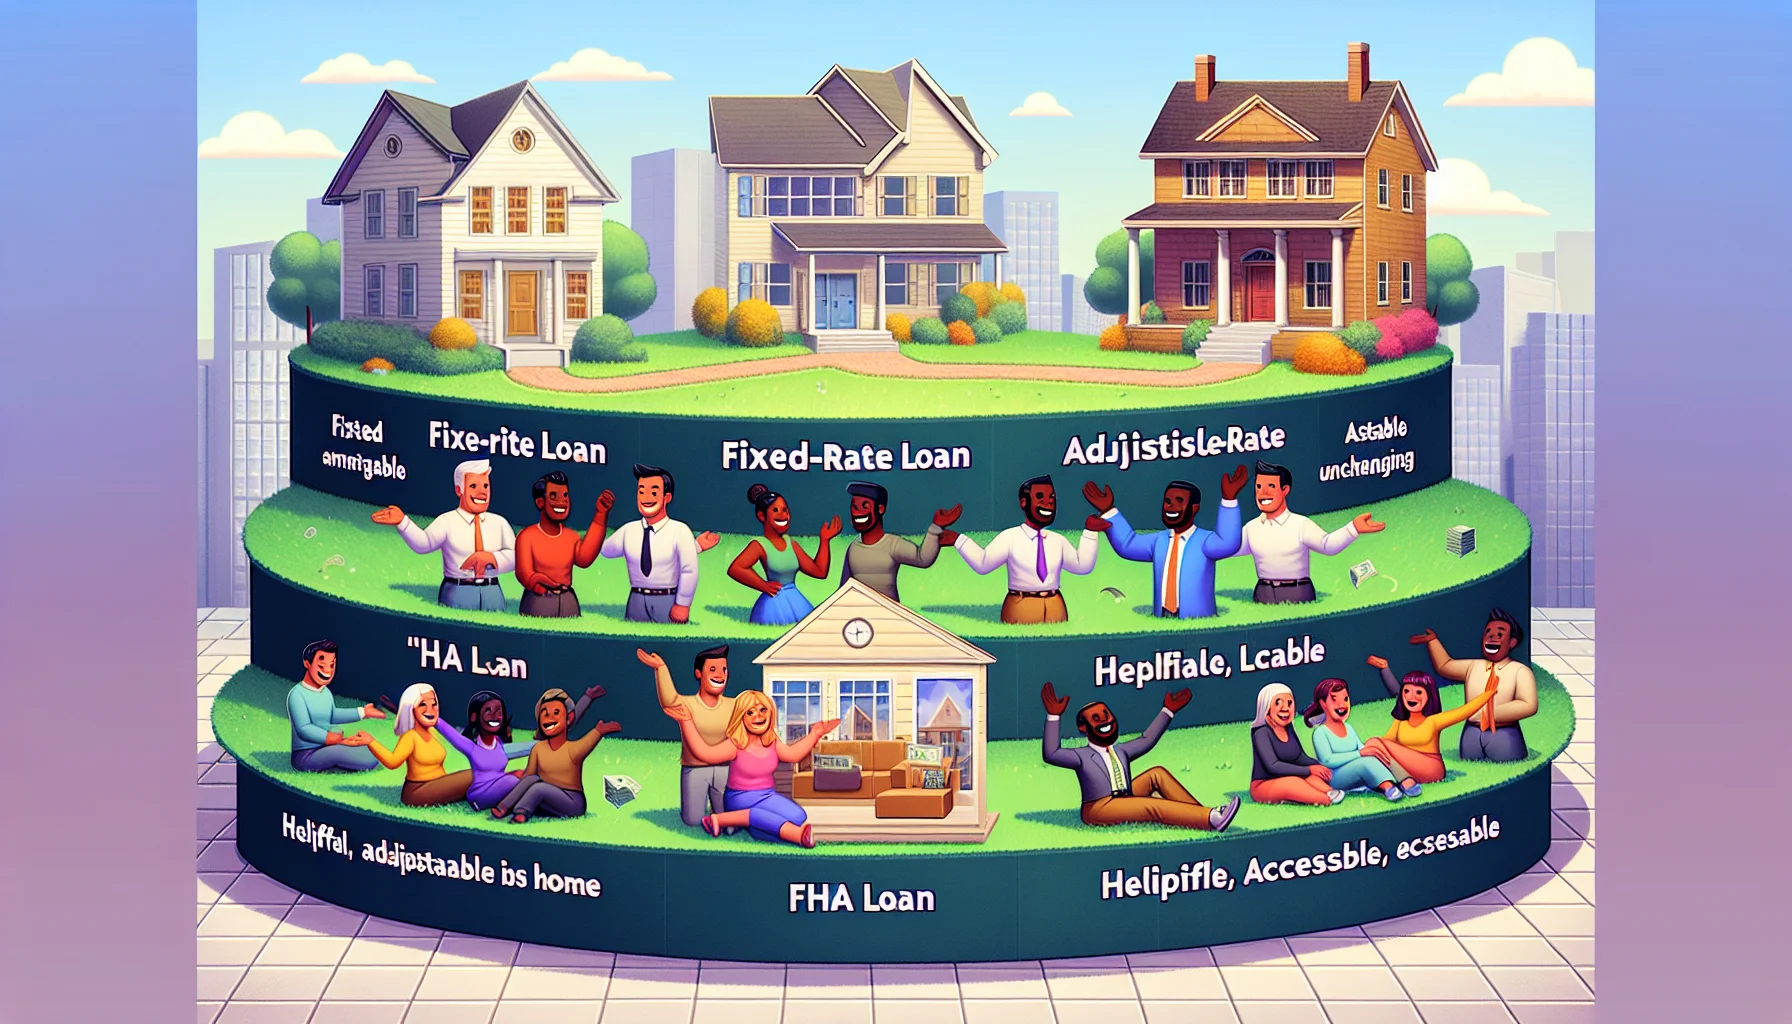 Generate a humorous yet realistic image illustrating different types of real estate loans. Showcase a favorable and perfect real estate environment. Include a 'Fixed-rate loan' represented as a stable, unchanging structure; an 'Adjustable-rate mortgage' shown as a flexible, adaptable building; an 'FHA loan' portrayed as a helpful, accessible pathway towards a cozy home, and a 'VA loan' demonstrated as a proud, steadfast edifice. Also depict a diverse group of cheerful individuals of various racial descents (Caucasian, Hispanic, Black, Middle-Eastern, South Asian) and gender enthusiastically discussing over these structures, implying their understanding and satisfaction in such a perfect scenario.